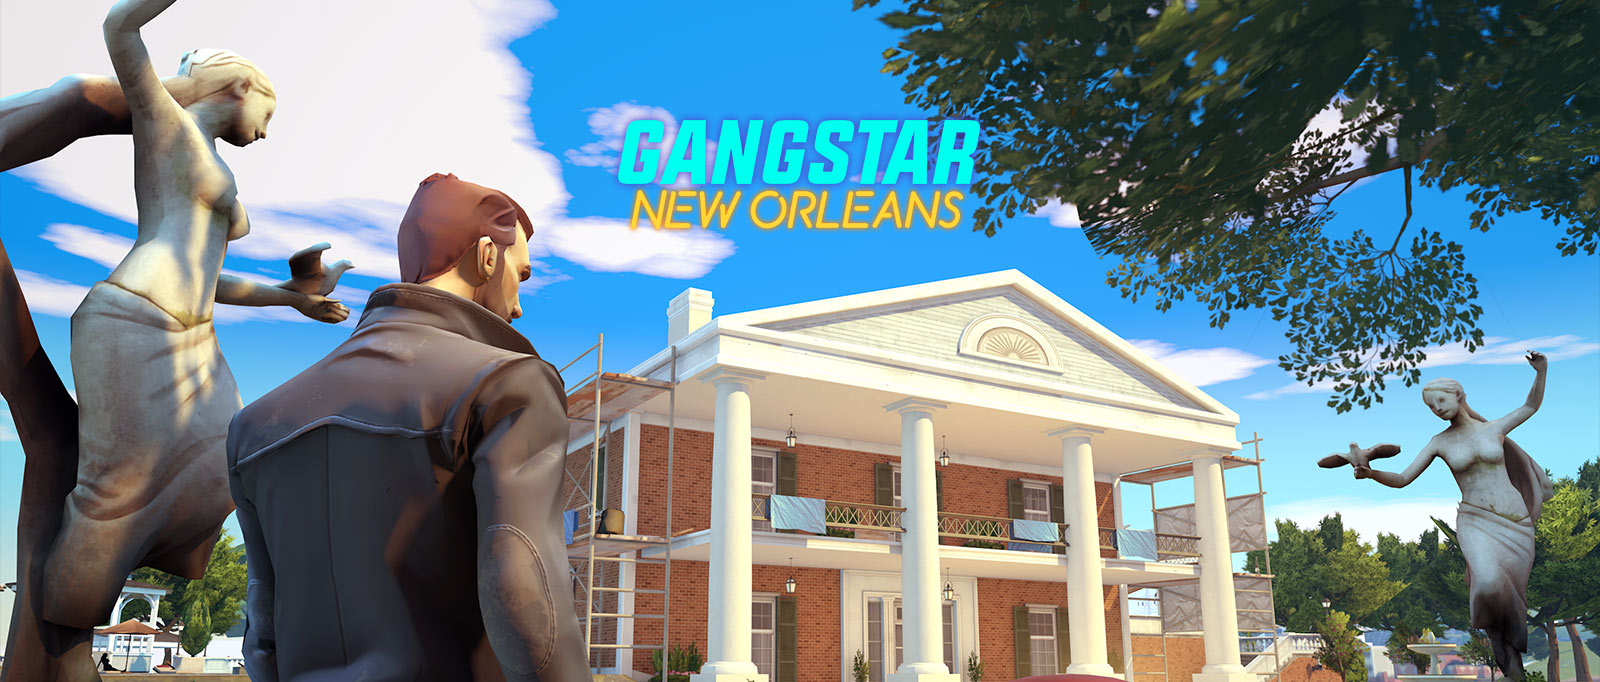 Gameloft's new open world game Gangstar New Orleans coming to